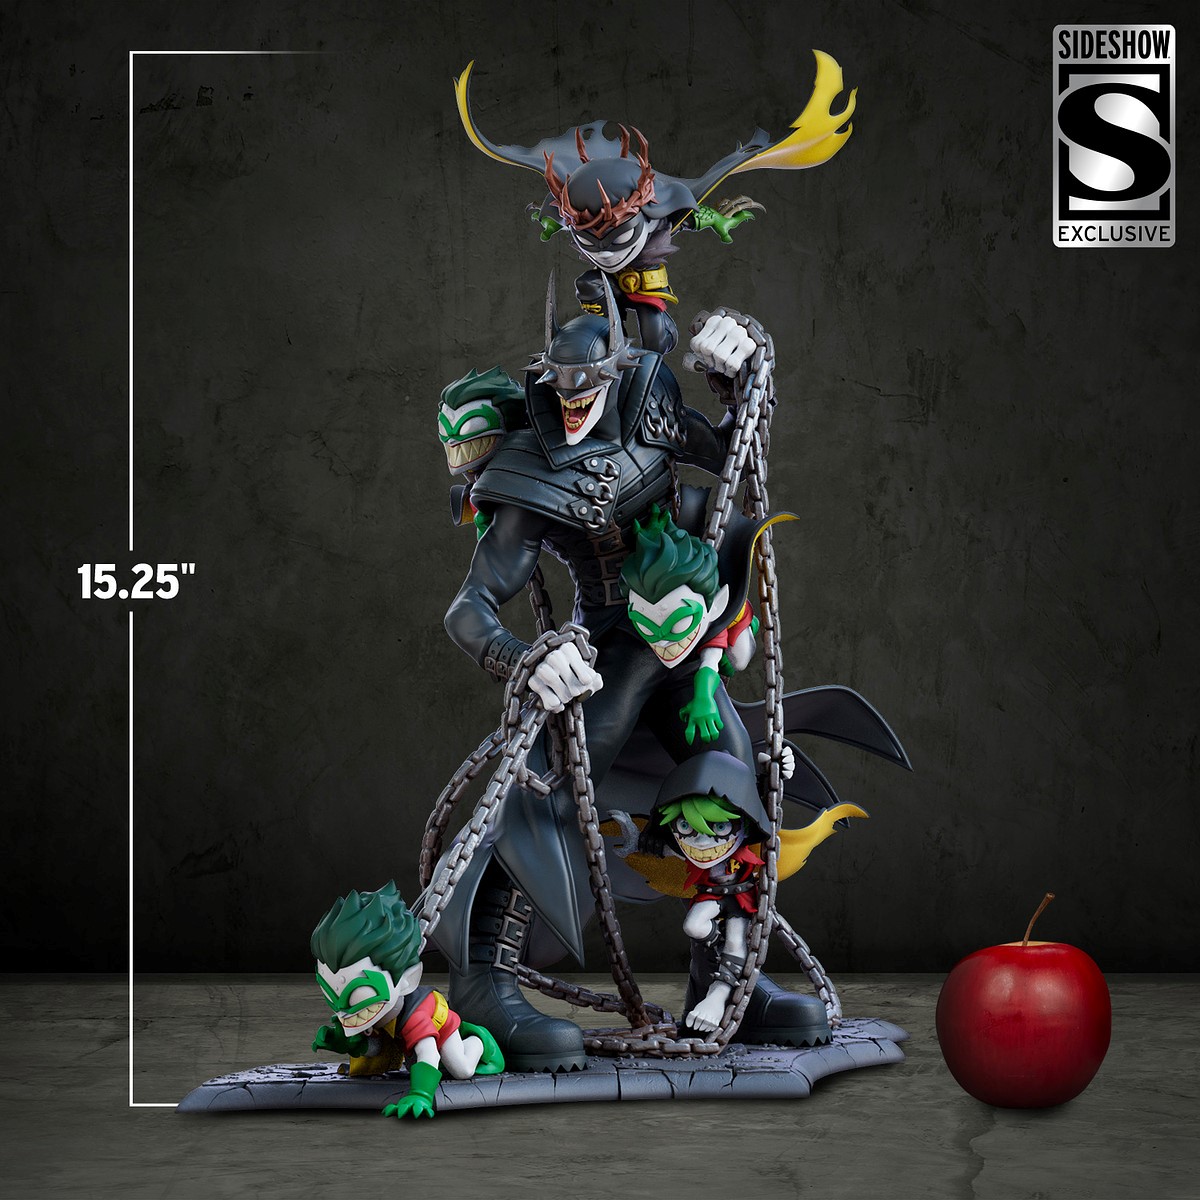 Batman Who Laughs (Artist Edition) Q-Master Exclusive Edition (Prototype Shown) View 2